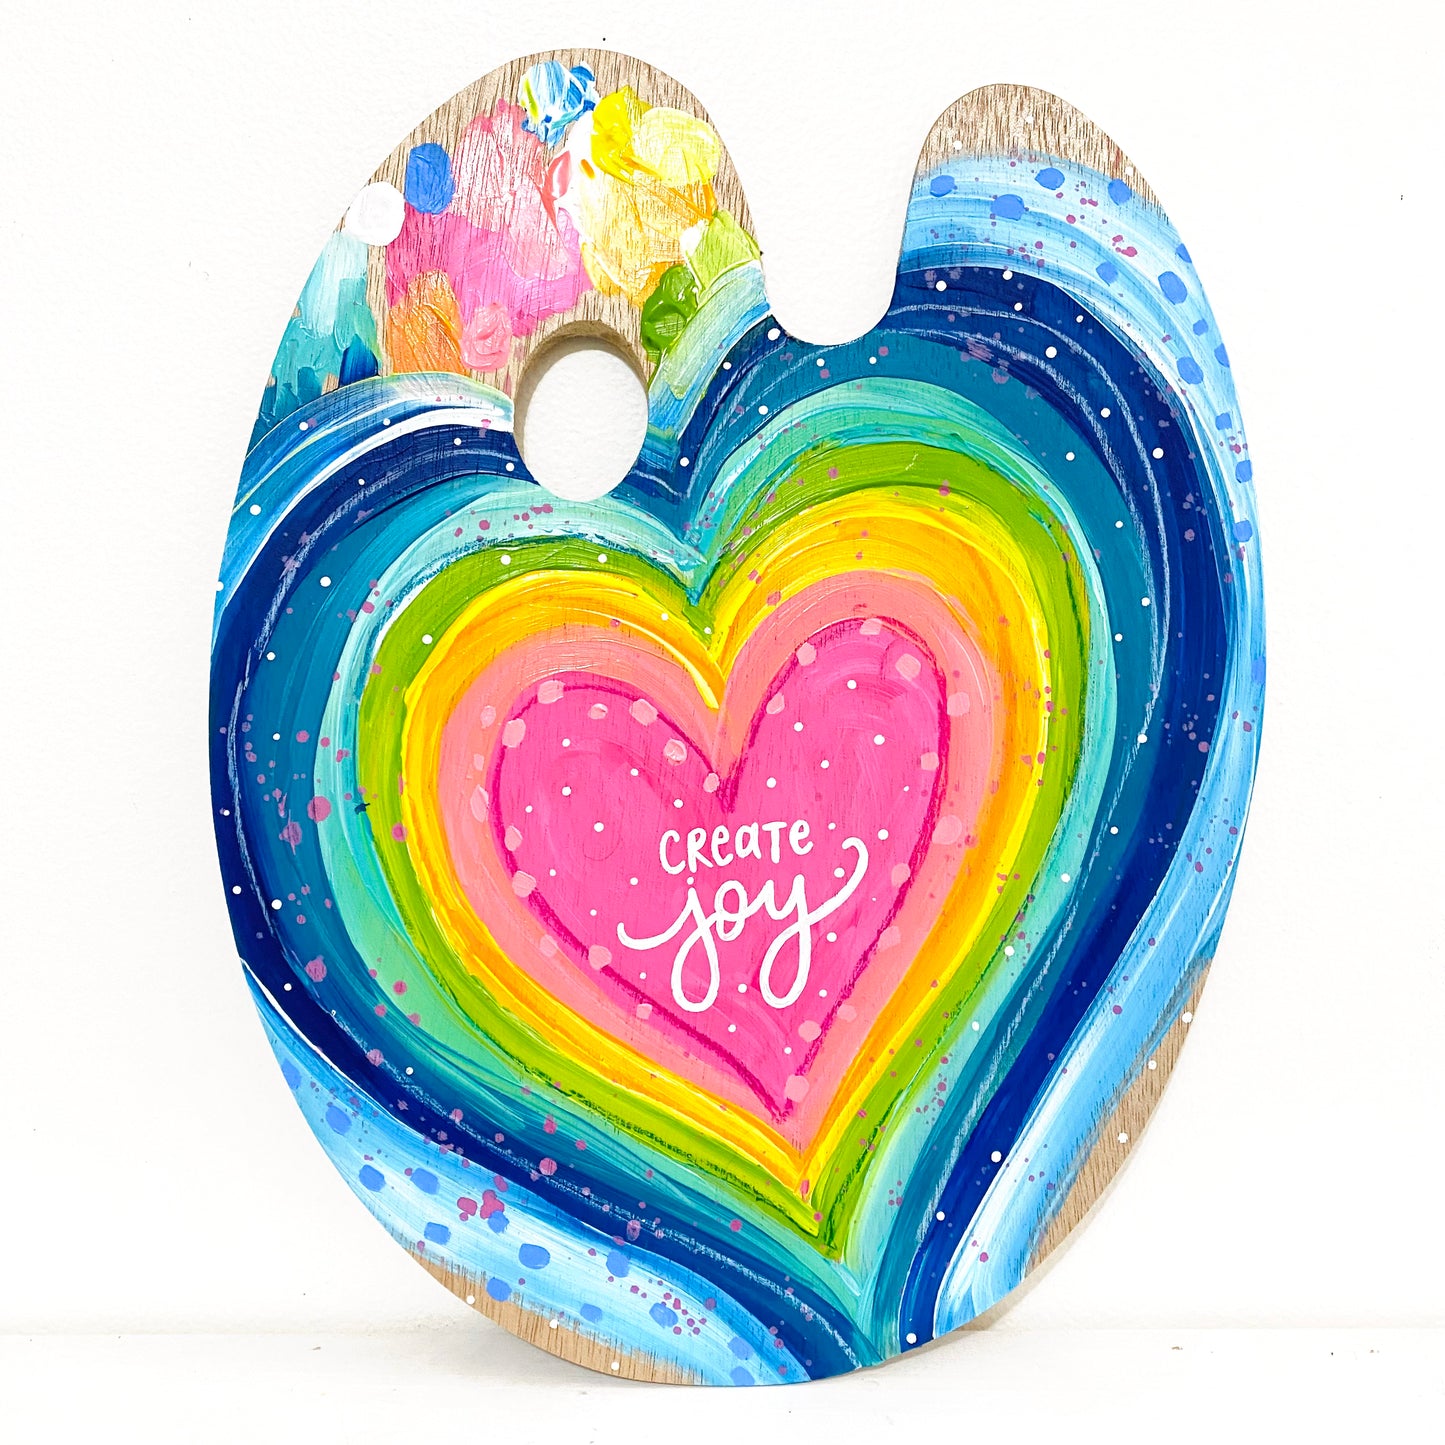 August 2022 Daily Paint Palette Painting Day 27 - Create Joy Hearts